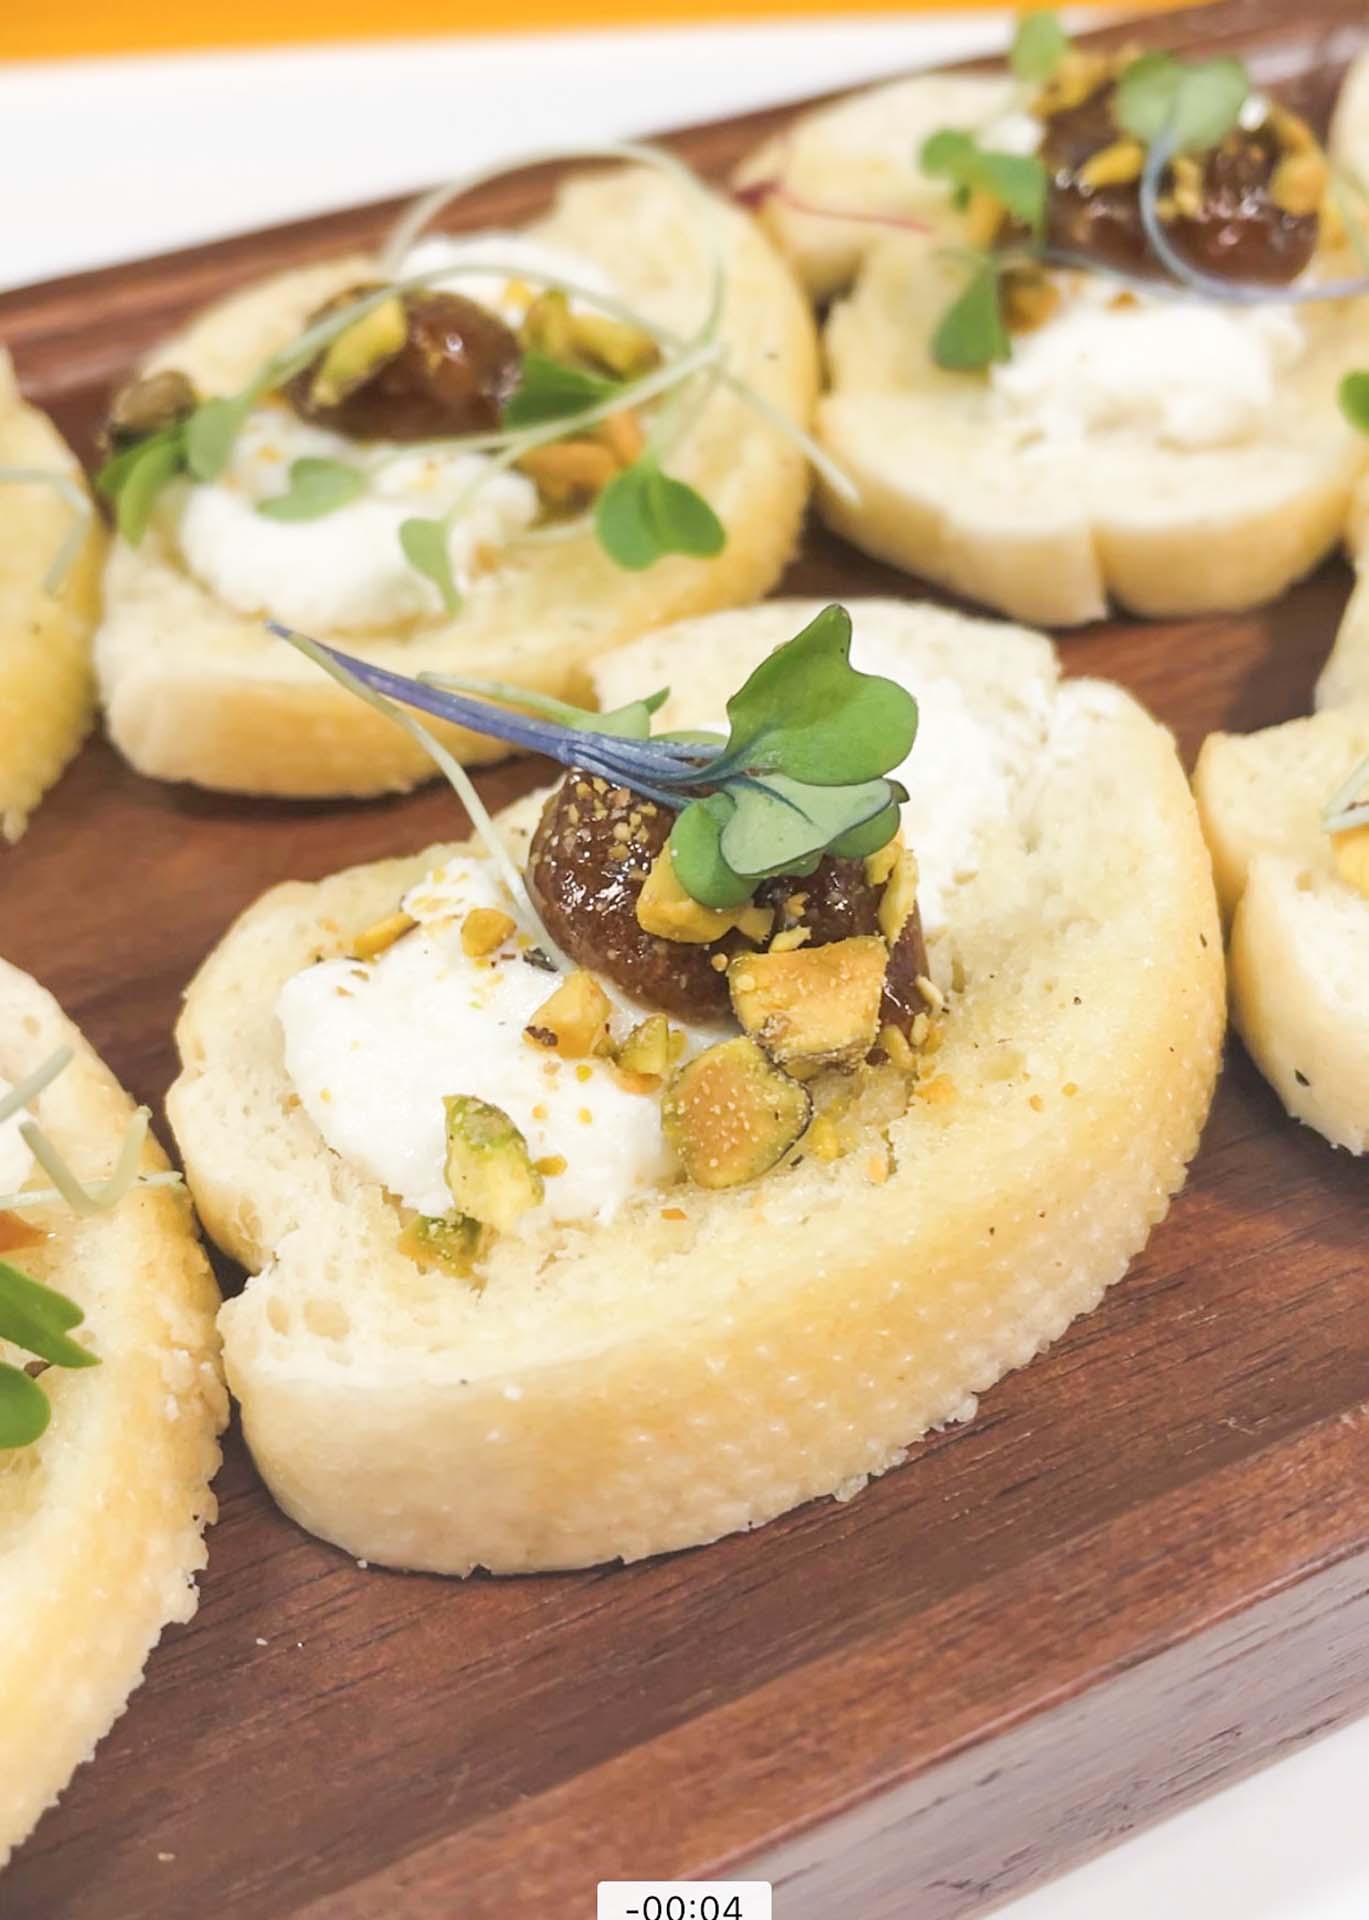 GOAT CHEESE AND PISTACHIO CROSTINI WITH FIG JAM